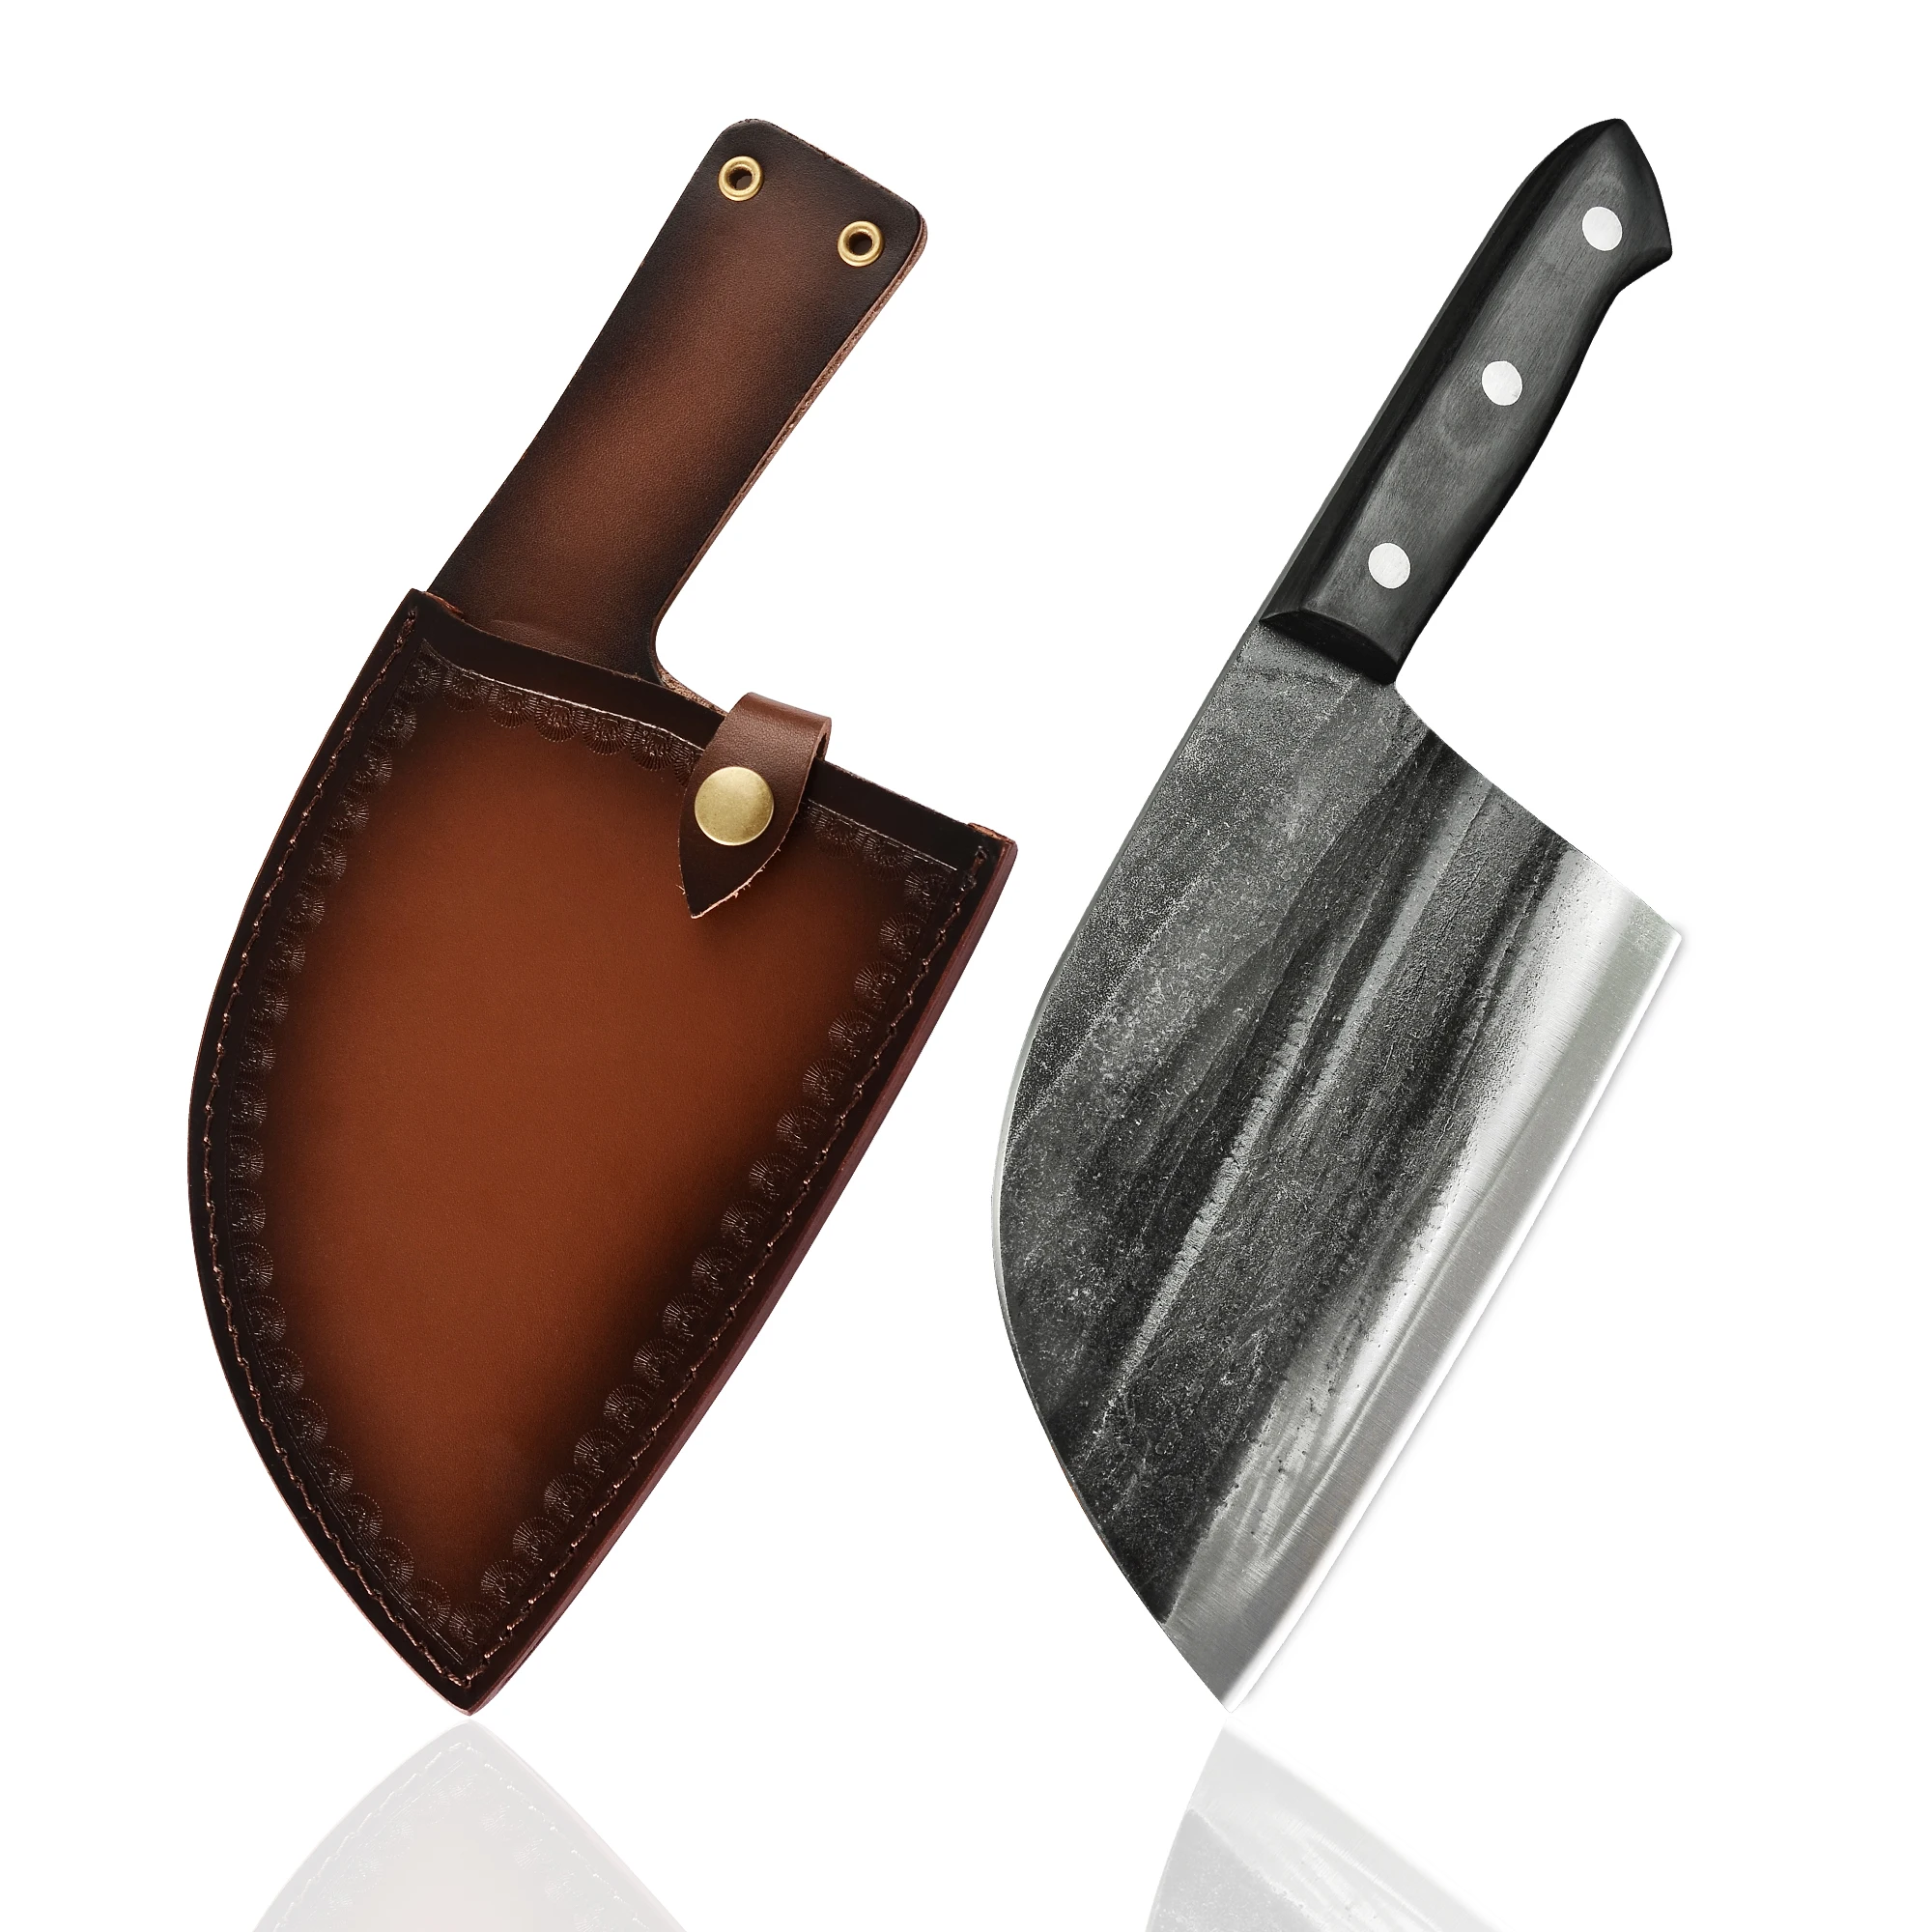 

Xingye 7 Inch Belt Loop Leather Sheath Large Big Chopping Cleaver Outdoors 5mm Thick Full Tang Forged Butcher Knife Set Meat